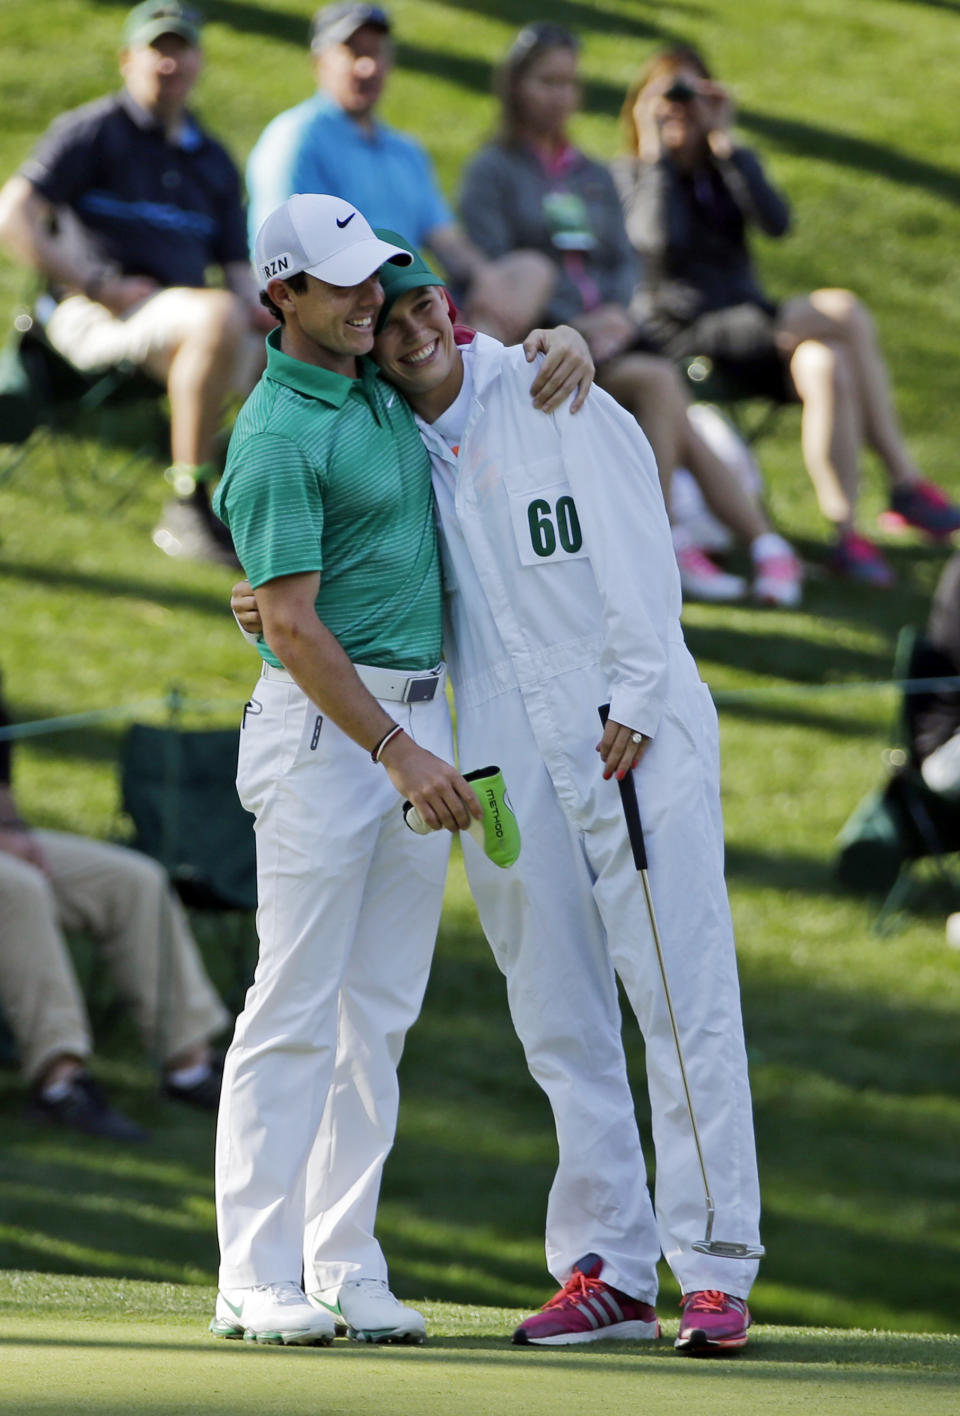 Rory McIlroy, of Northern Ireland, hugs tennis player Caroline Wozniacki after Wozniacki putted on the ninth hole during the par three competition at the Masters golf tournament Wednesday, April 9, 2014, in Augusta, Ga. (AP Photo/David J. Phillip)